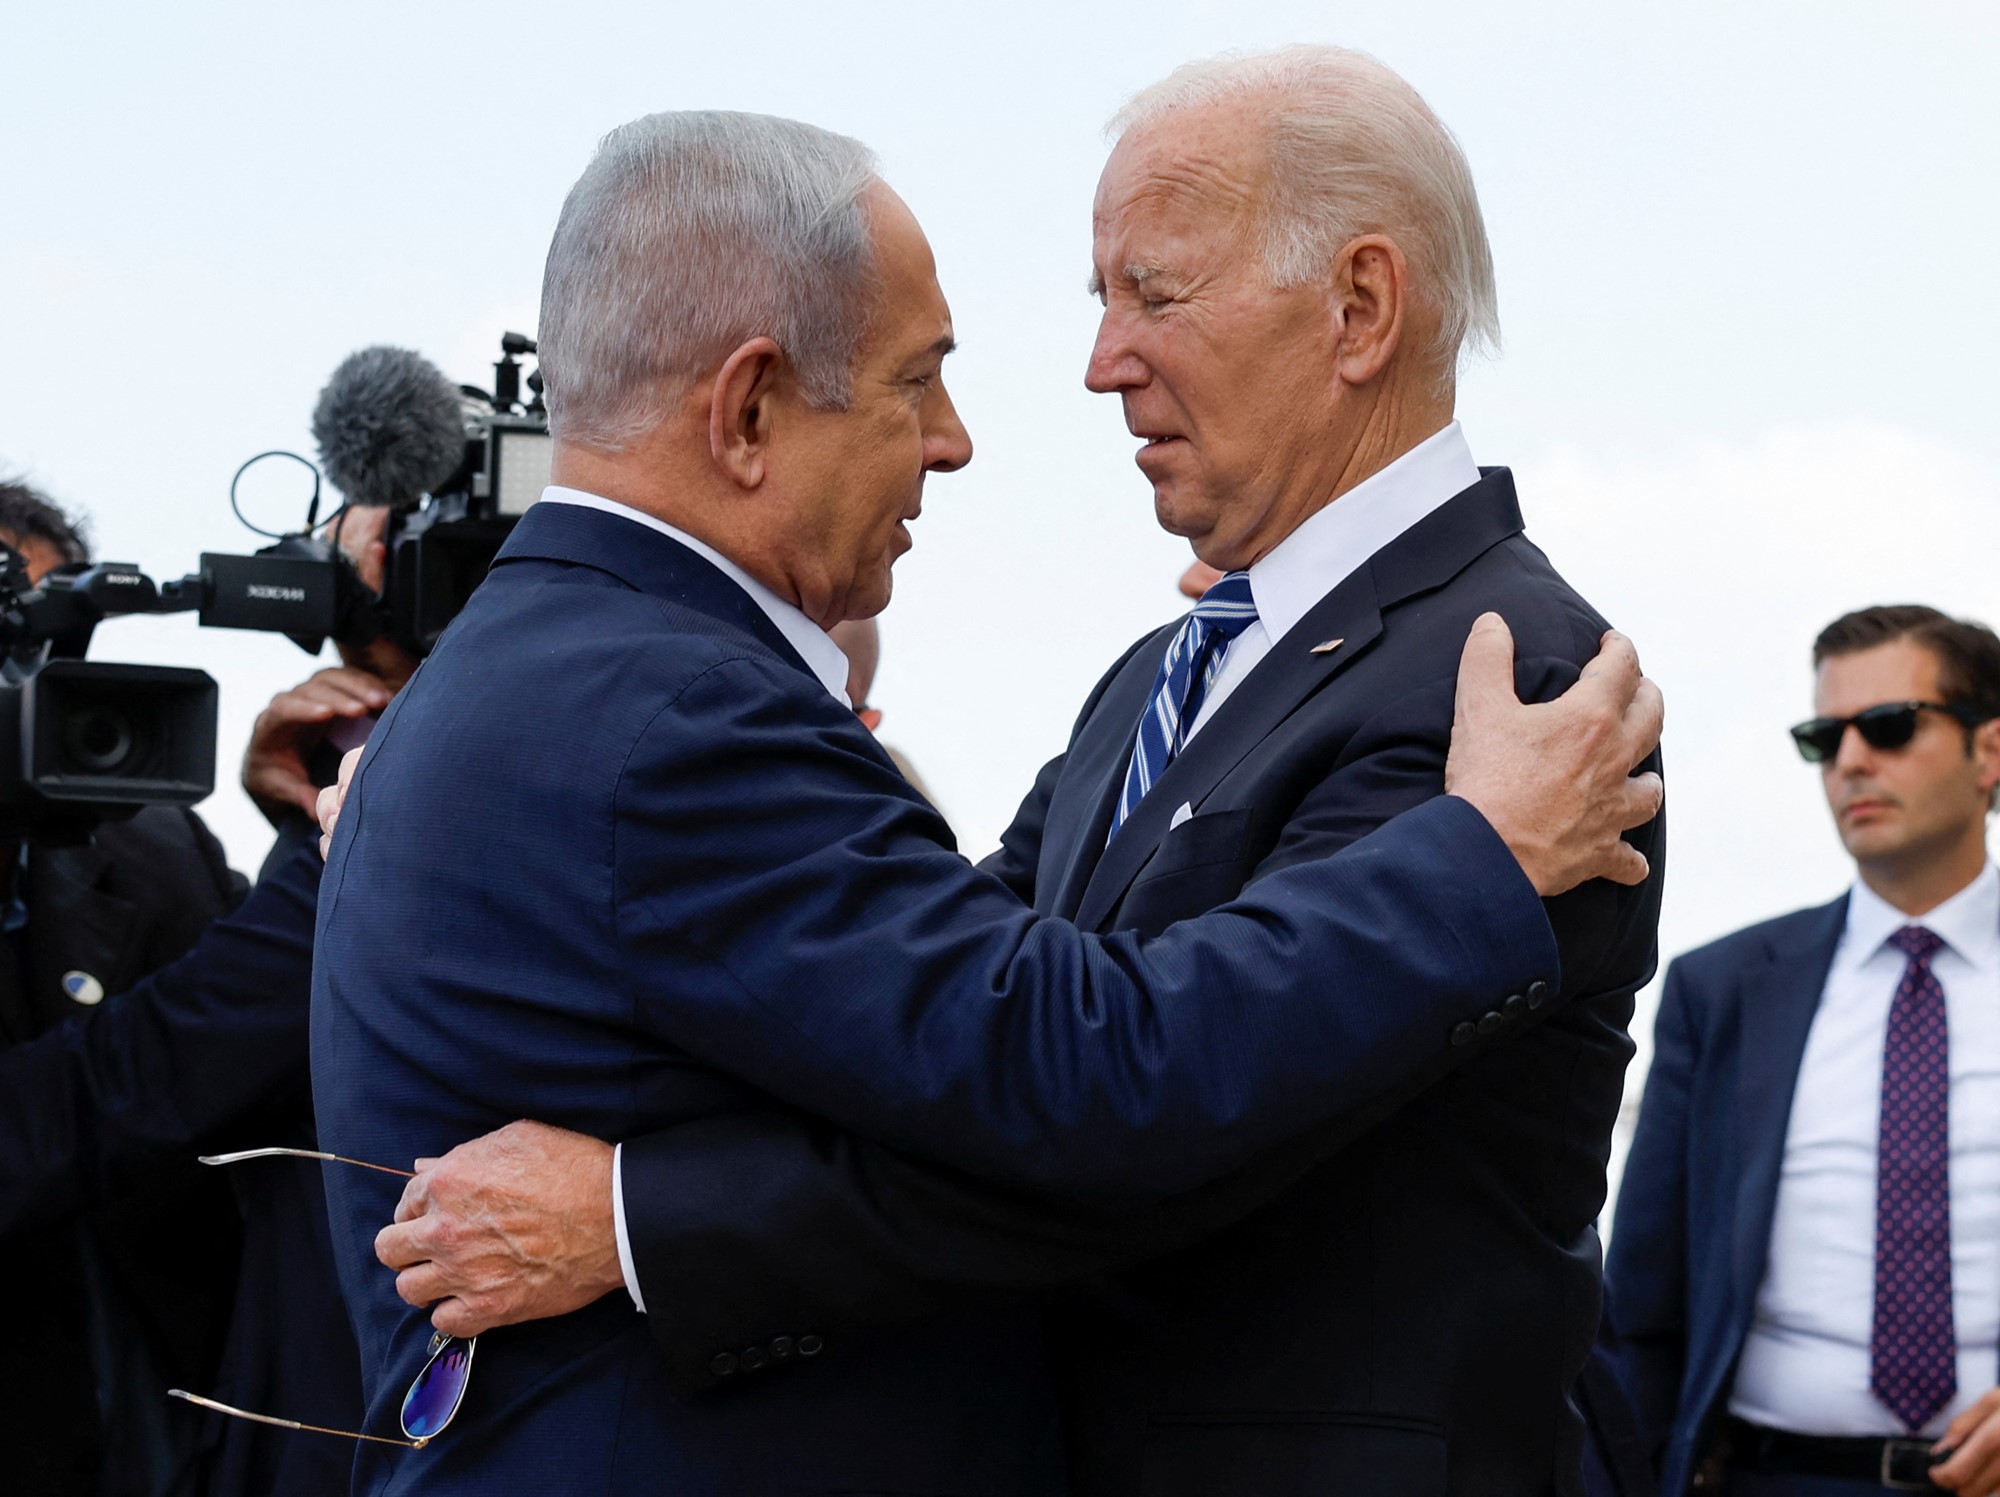 Two old men embracing with hands on each other.